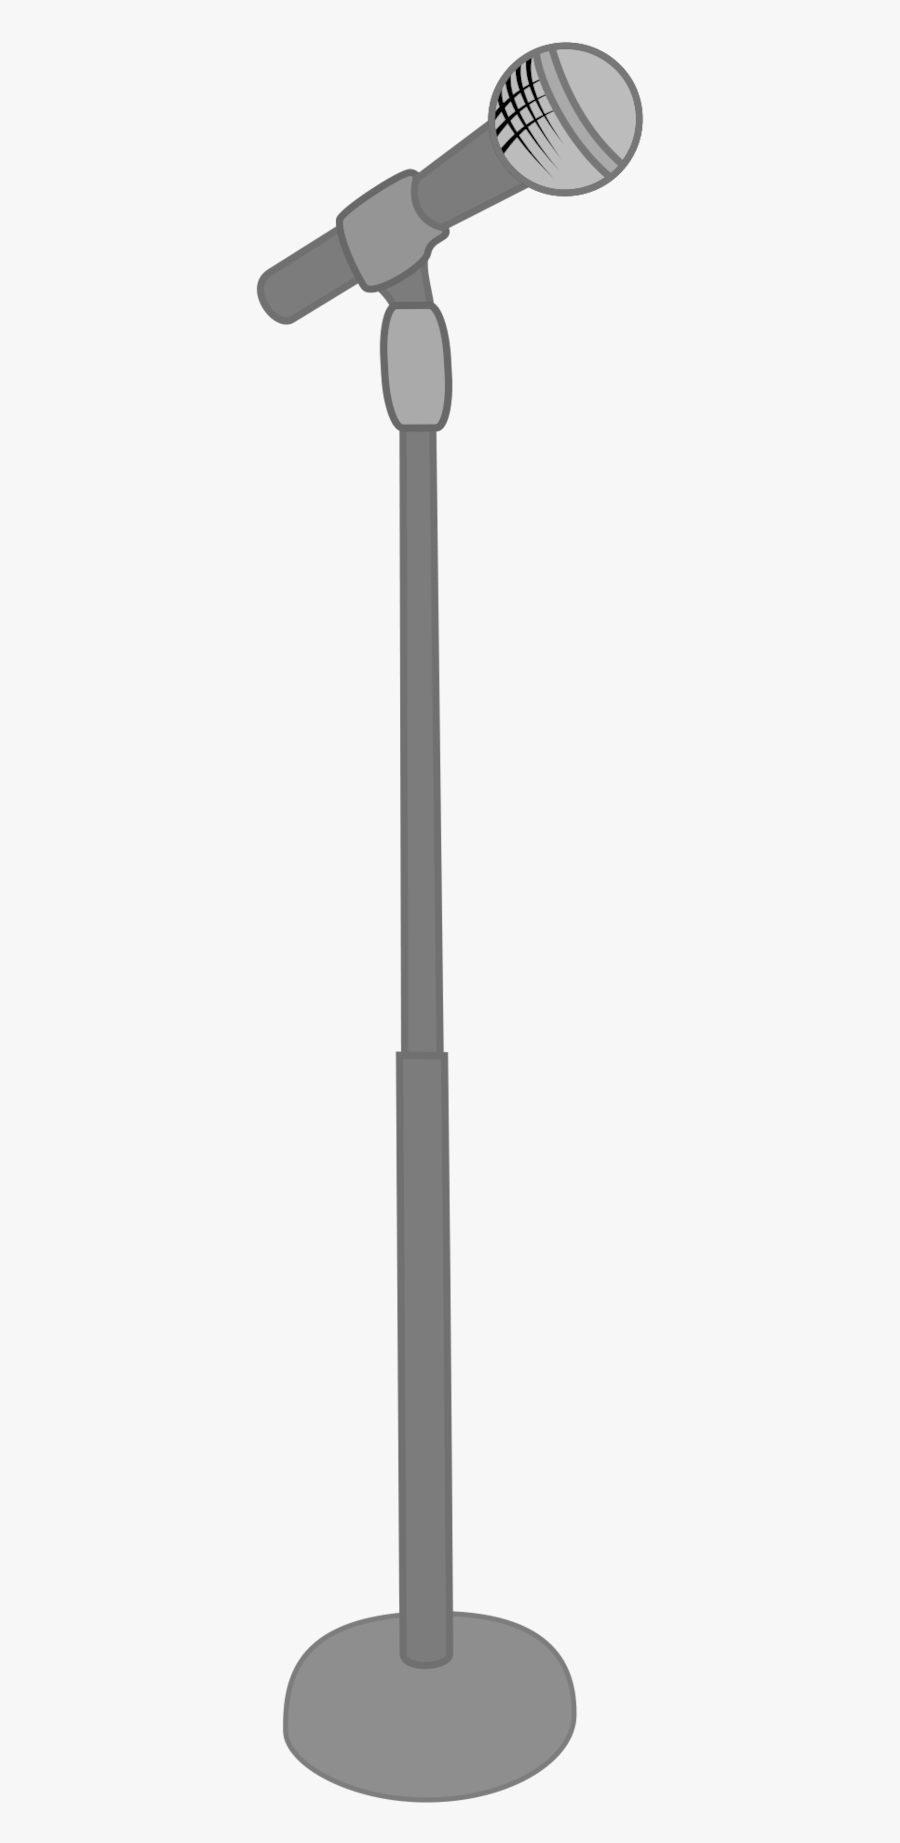 Mic Stand Vector By Meteor-venture - Microphone With Stand Png, Transparent Clipart